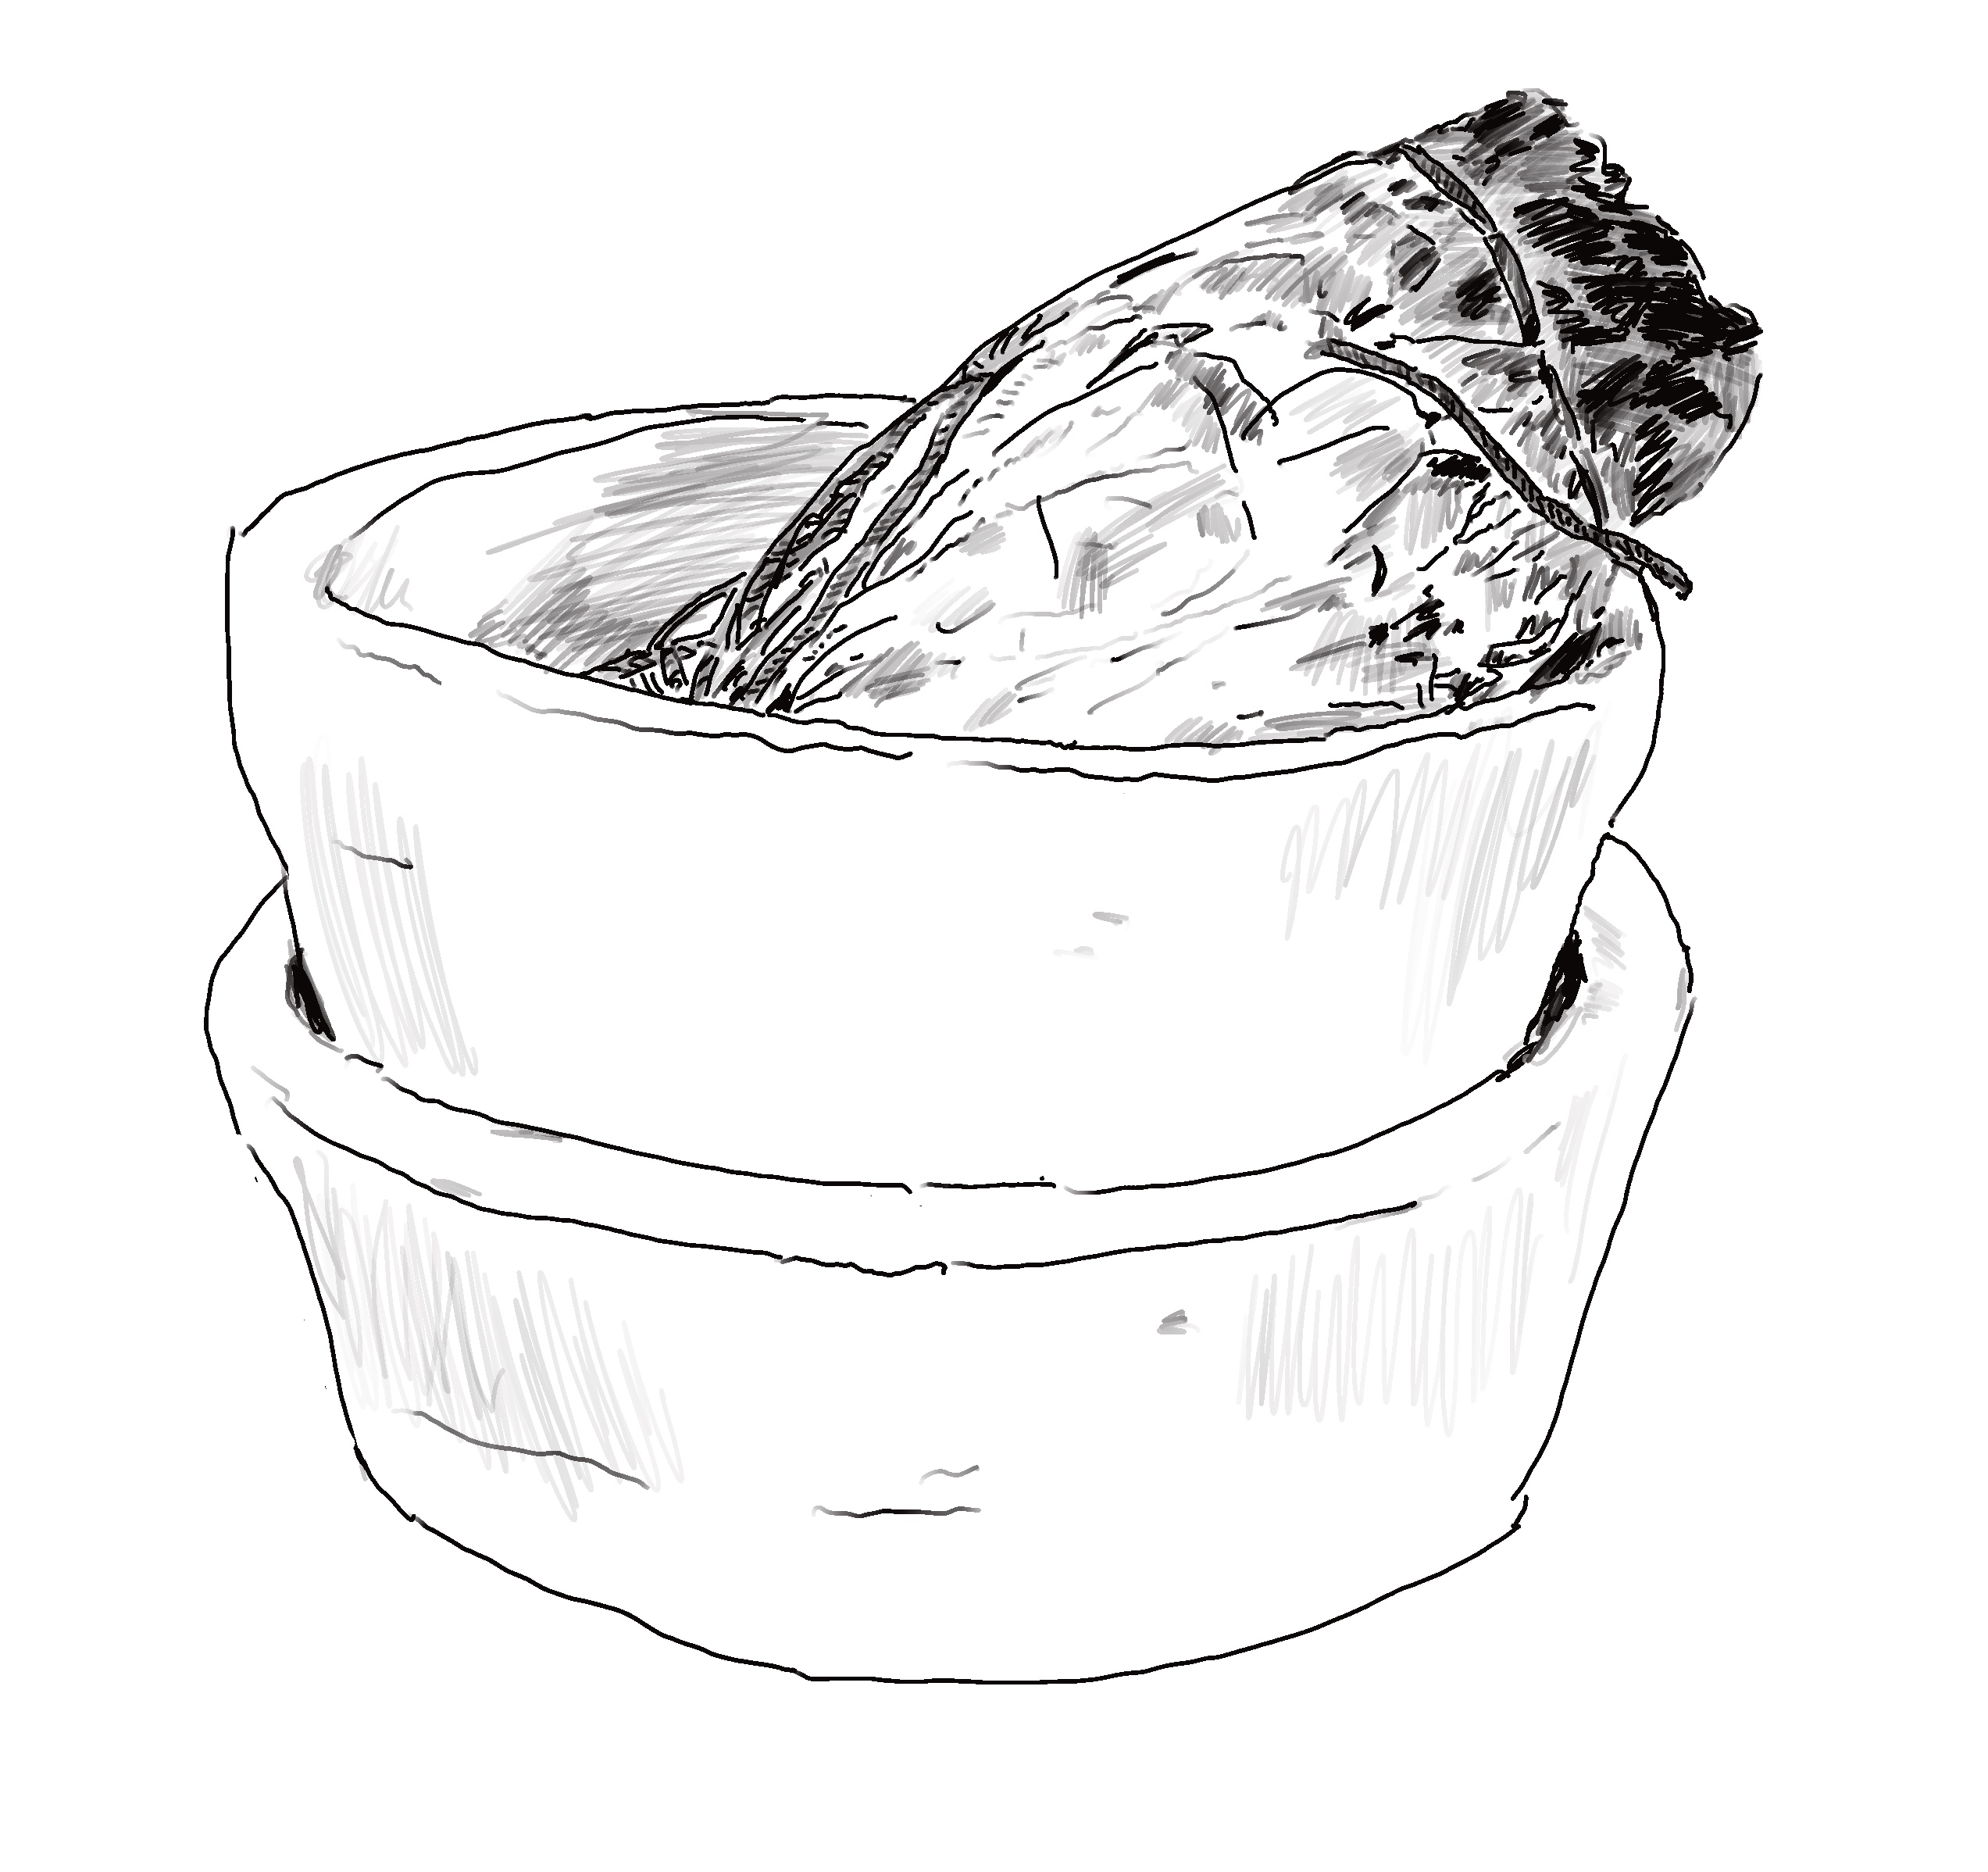 black and white drawing of smudge stick in bowl